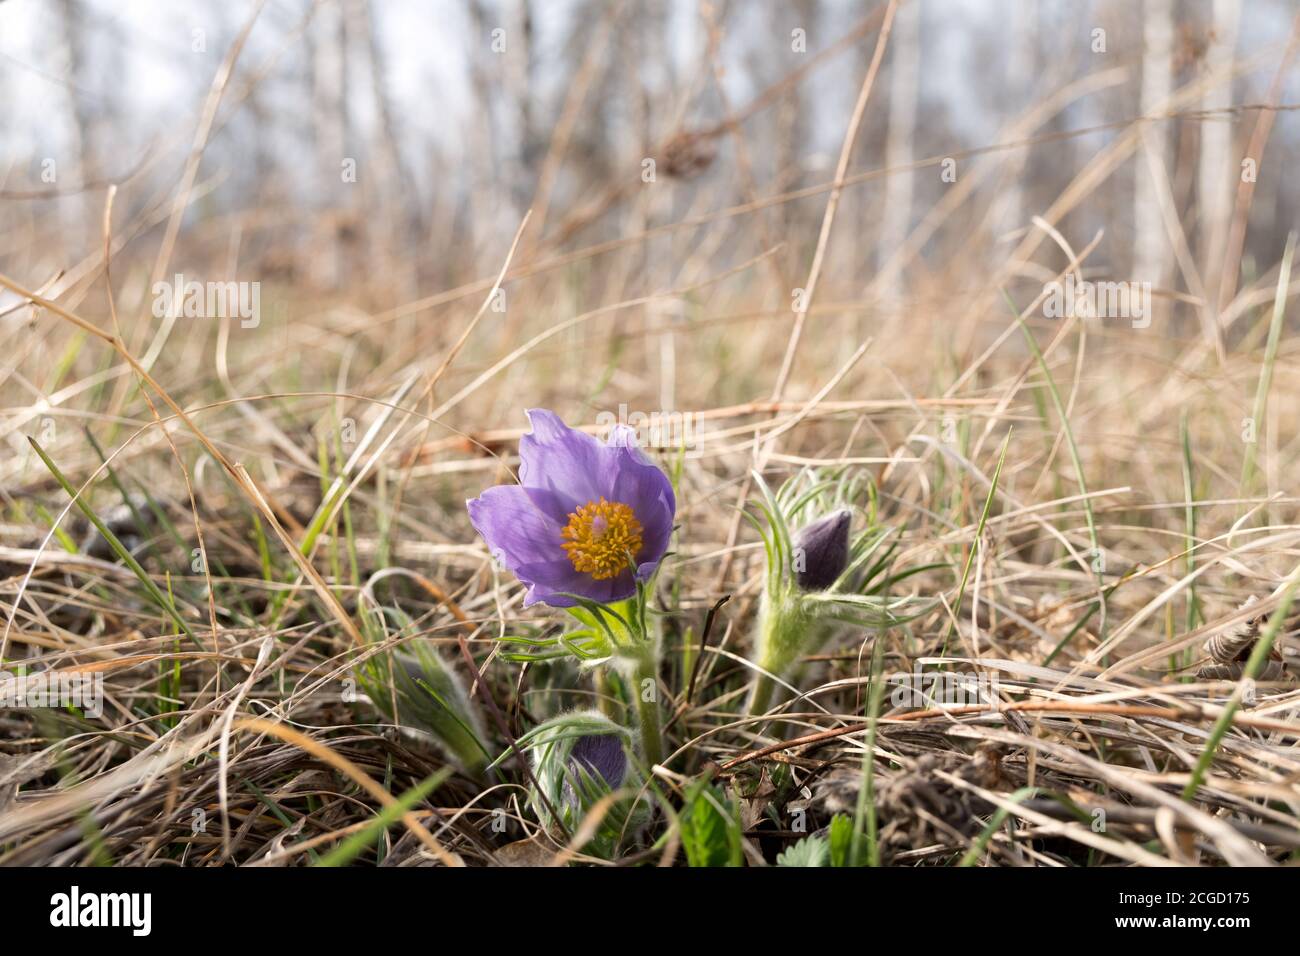 Purple flower of Pulsatilla or spreading pasqueflower made its way through dry grass at the edge of a birch grove. Stock Photo